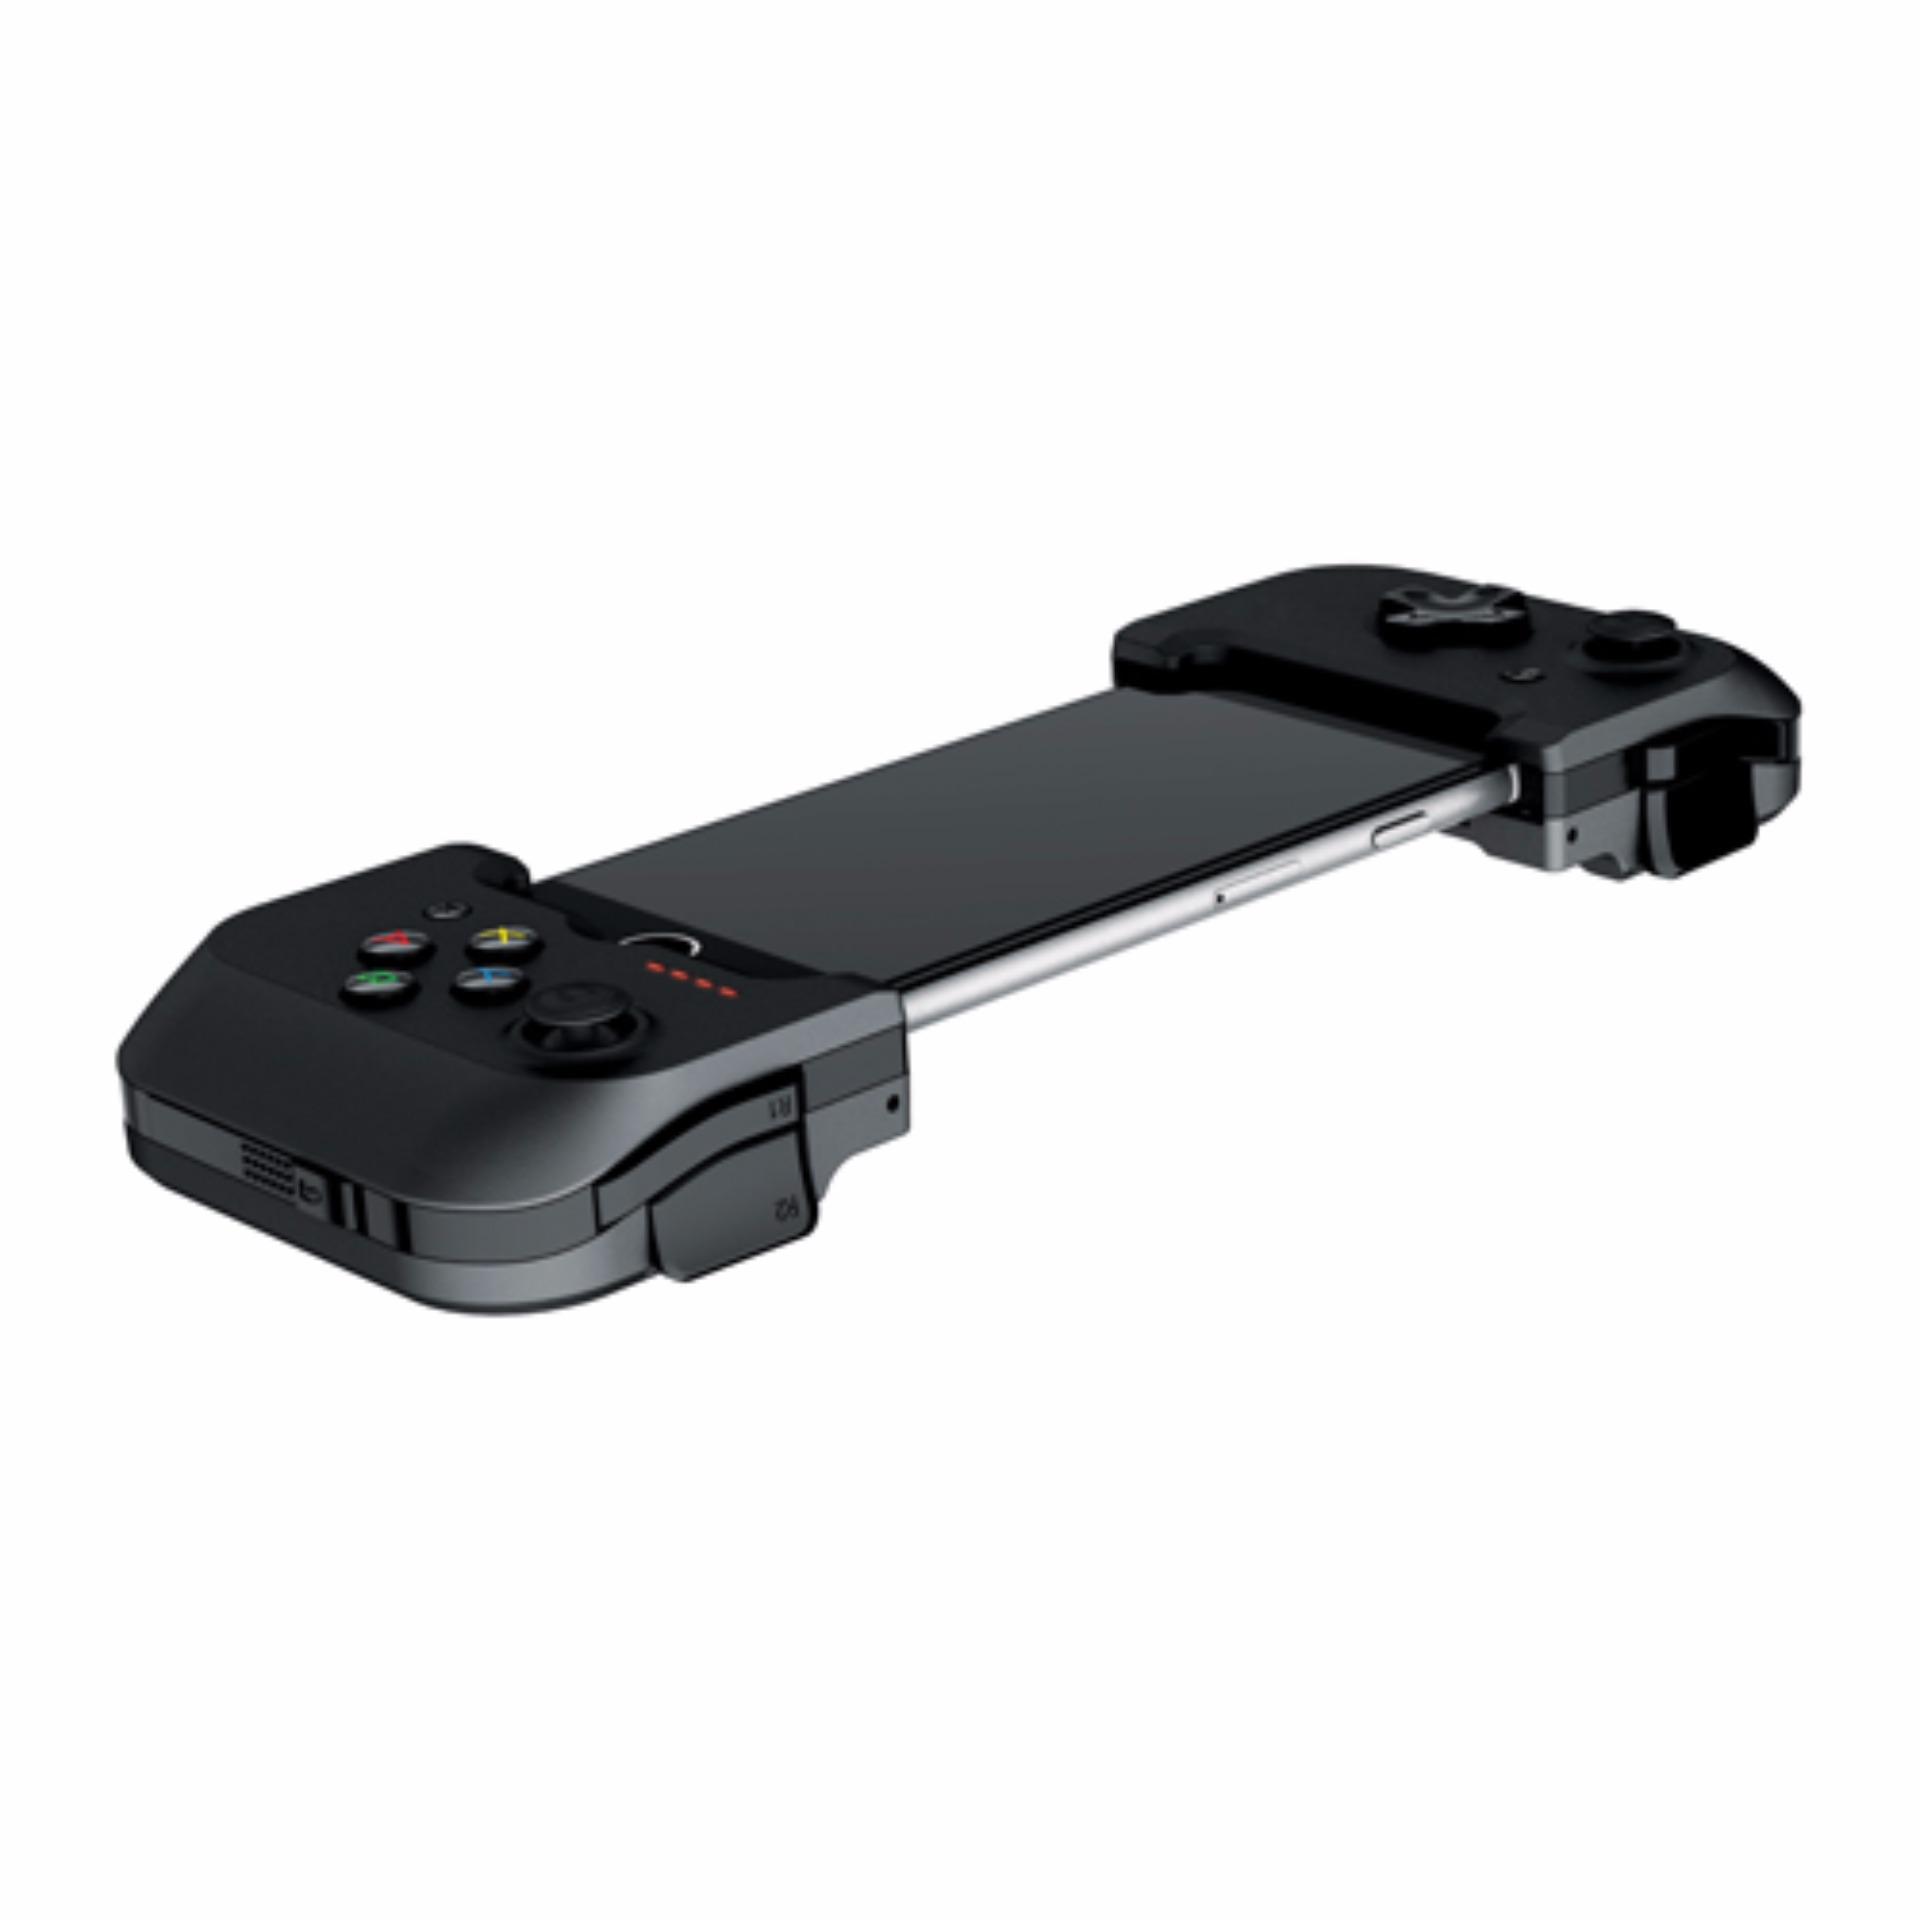 Gamevice Controller for iPhone 6/6s & iPhone 6 Plus/6s Plus(Black)